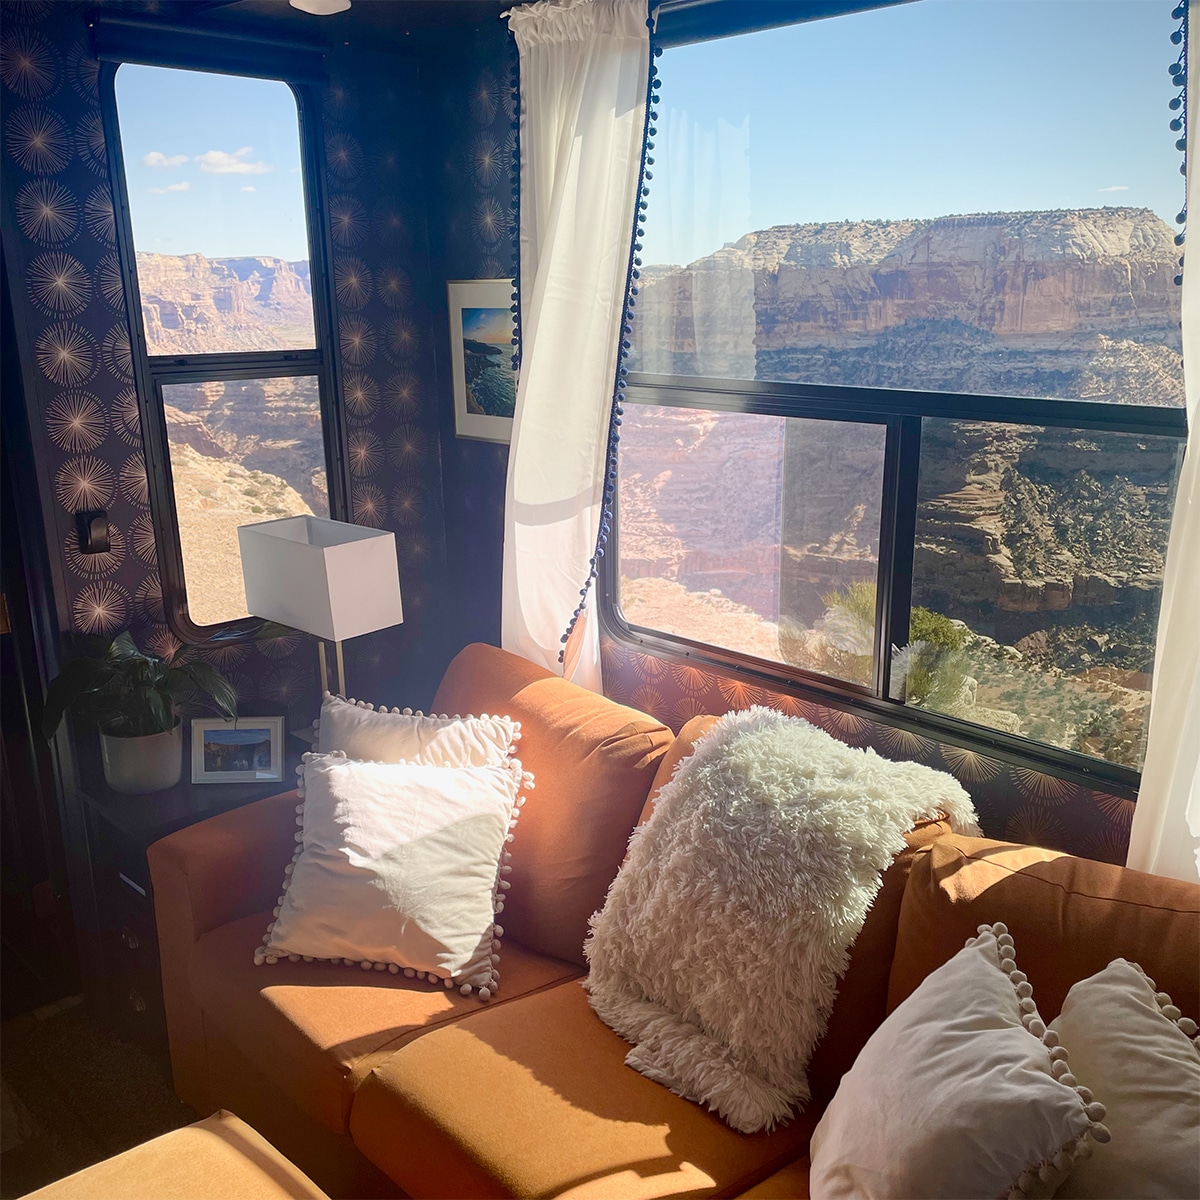 Looking out our living room windows at The Little Grand Canyon in Utah.